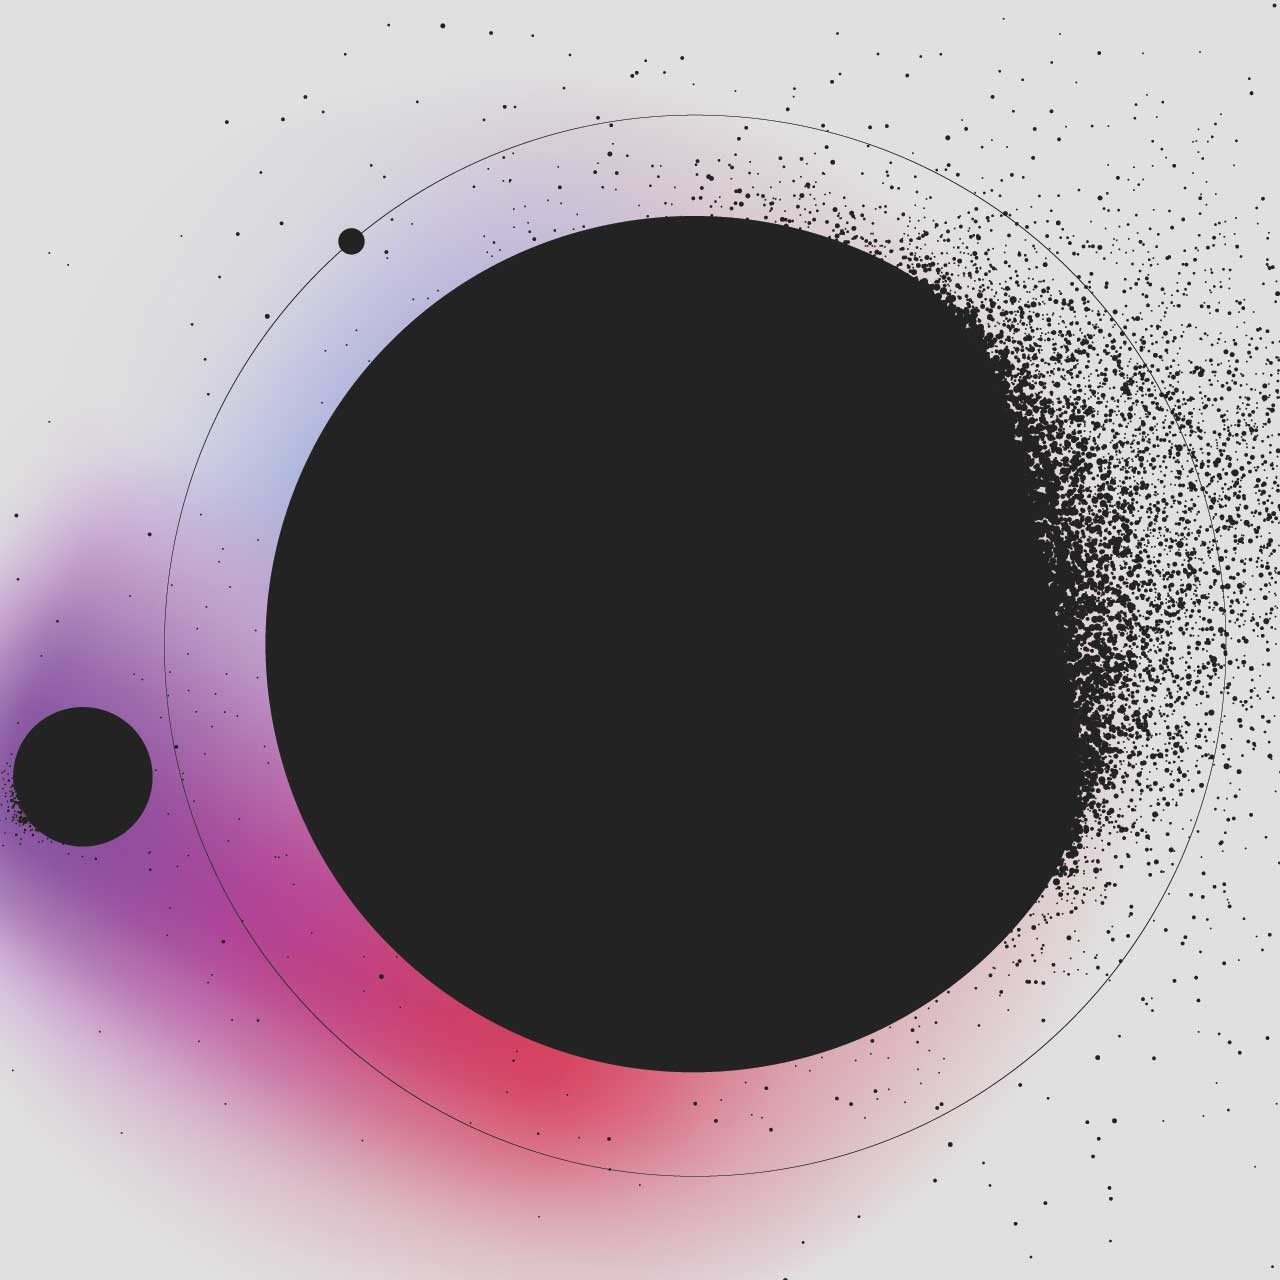 Digitally Illustrated Graphic. Black circles and dots with a white, pink, purple, and blue background.